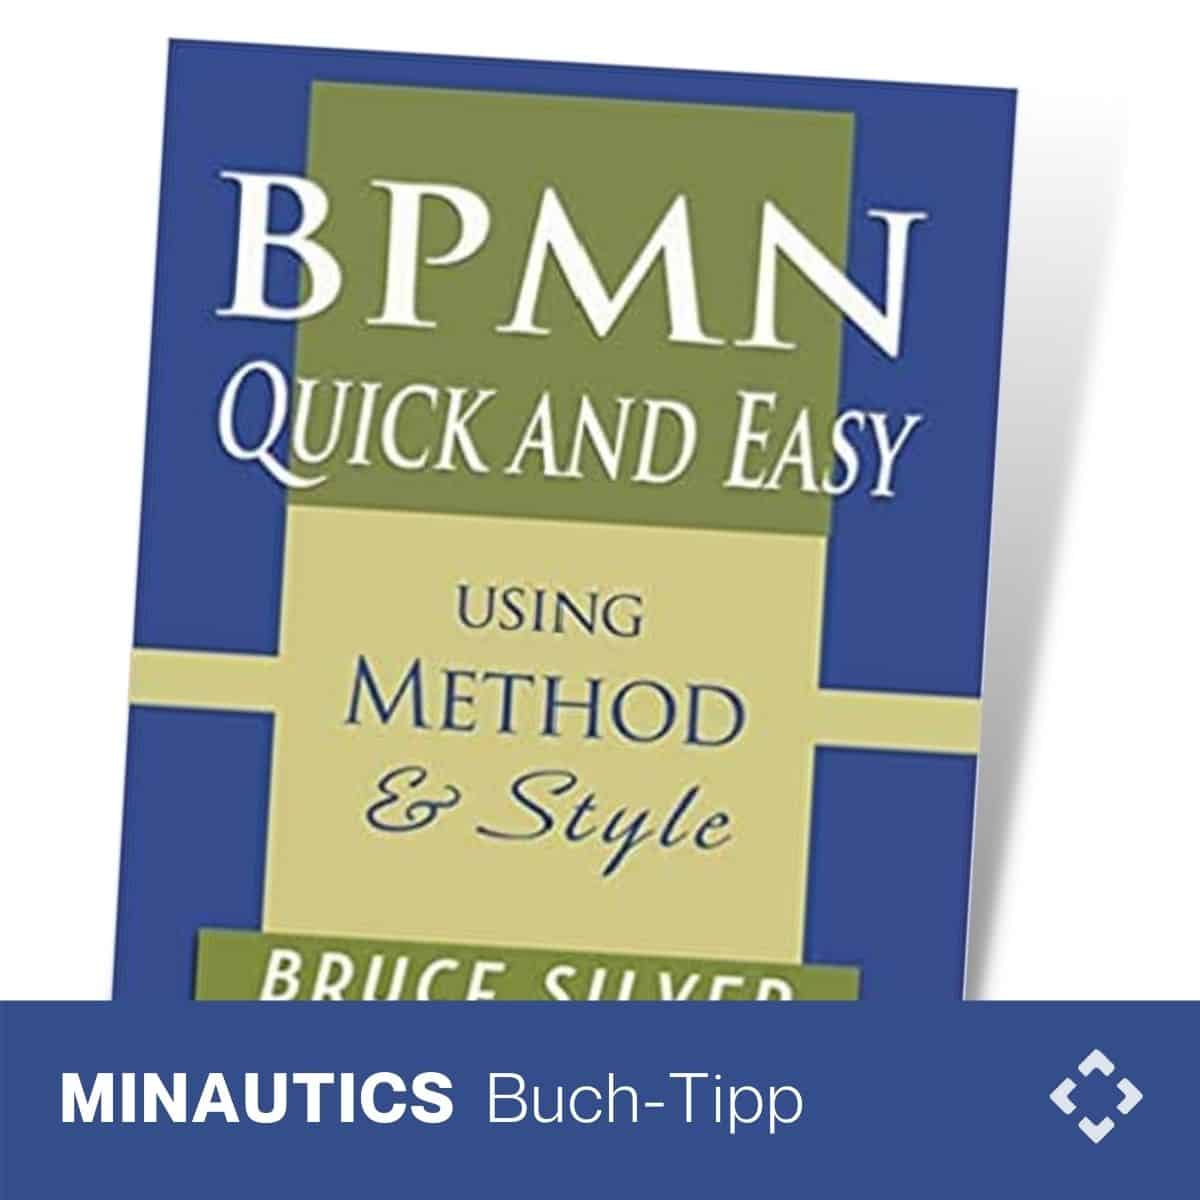 BPMN Quick and Easy Using Method and Style 0 (0)